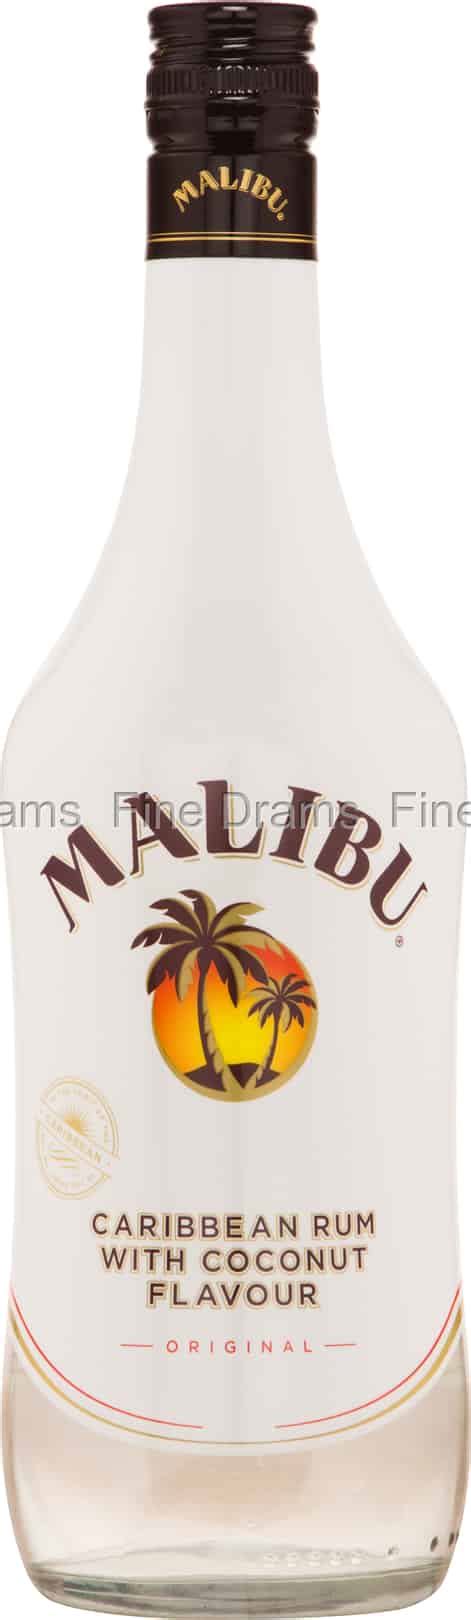 Malibu original white rum with coconut is perfect for when the sun's setting and the good times are flowing. Malibu | Caribbean Rum With Coconut Flavour